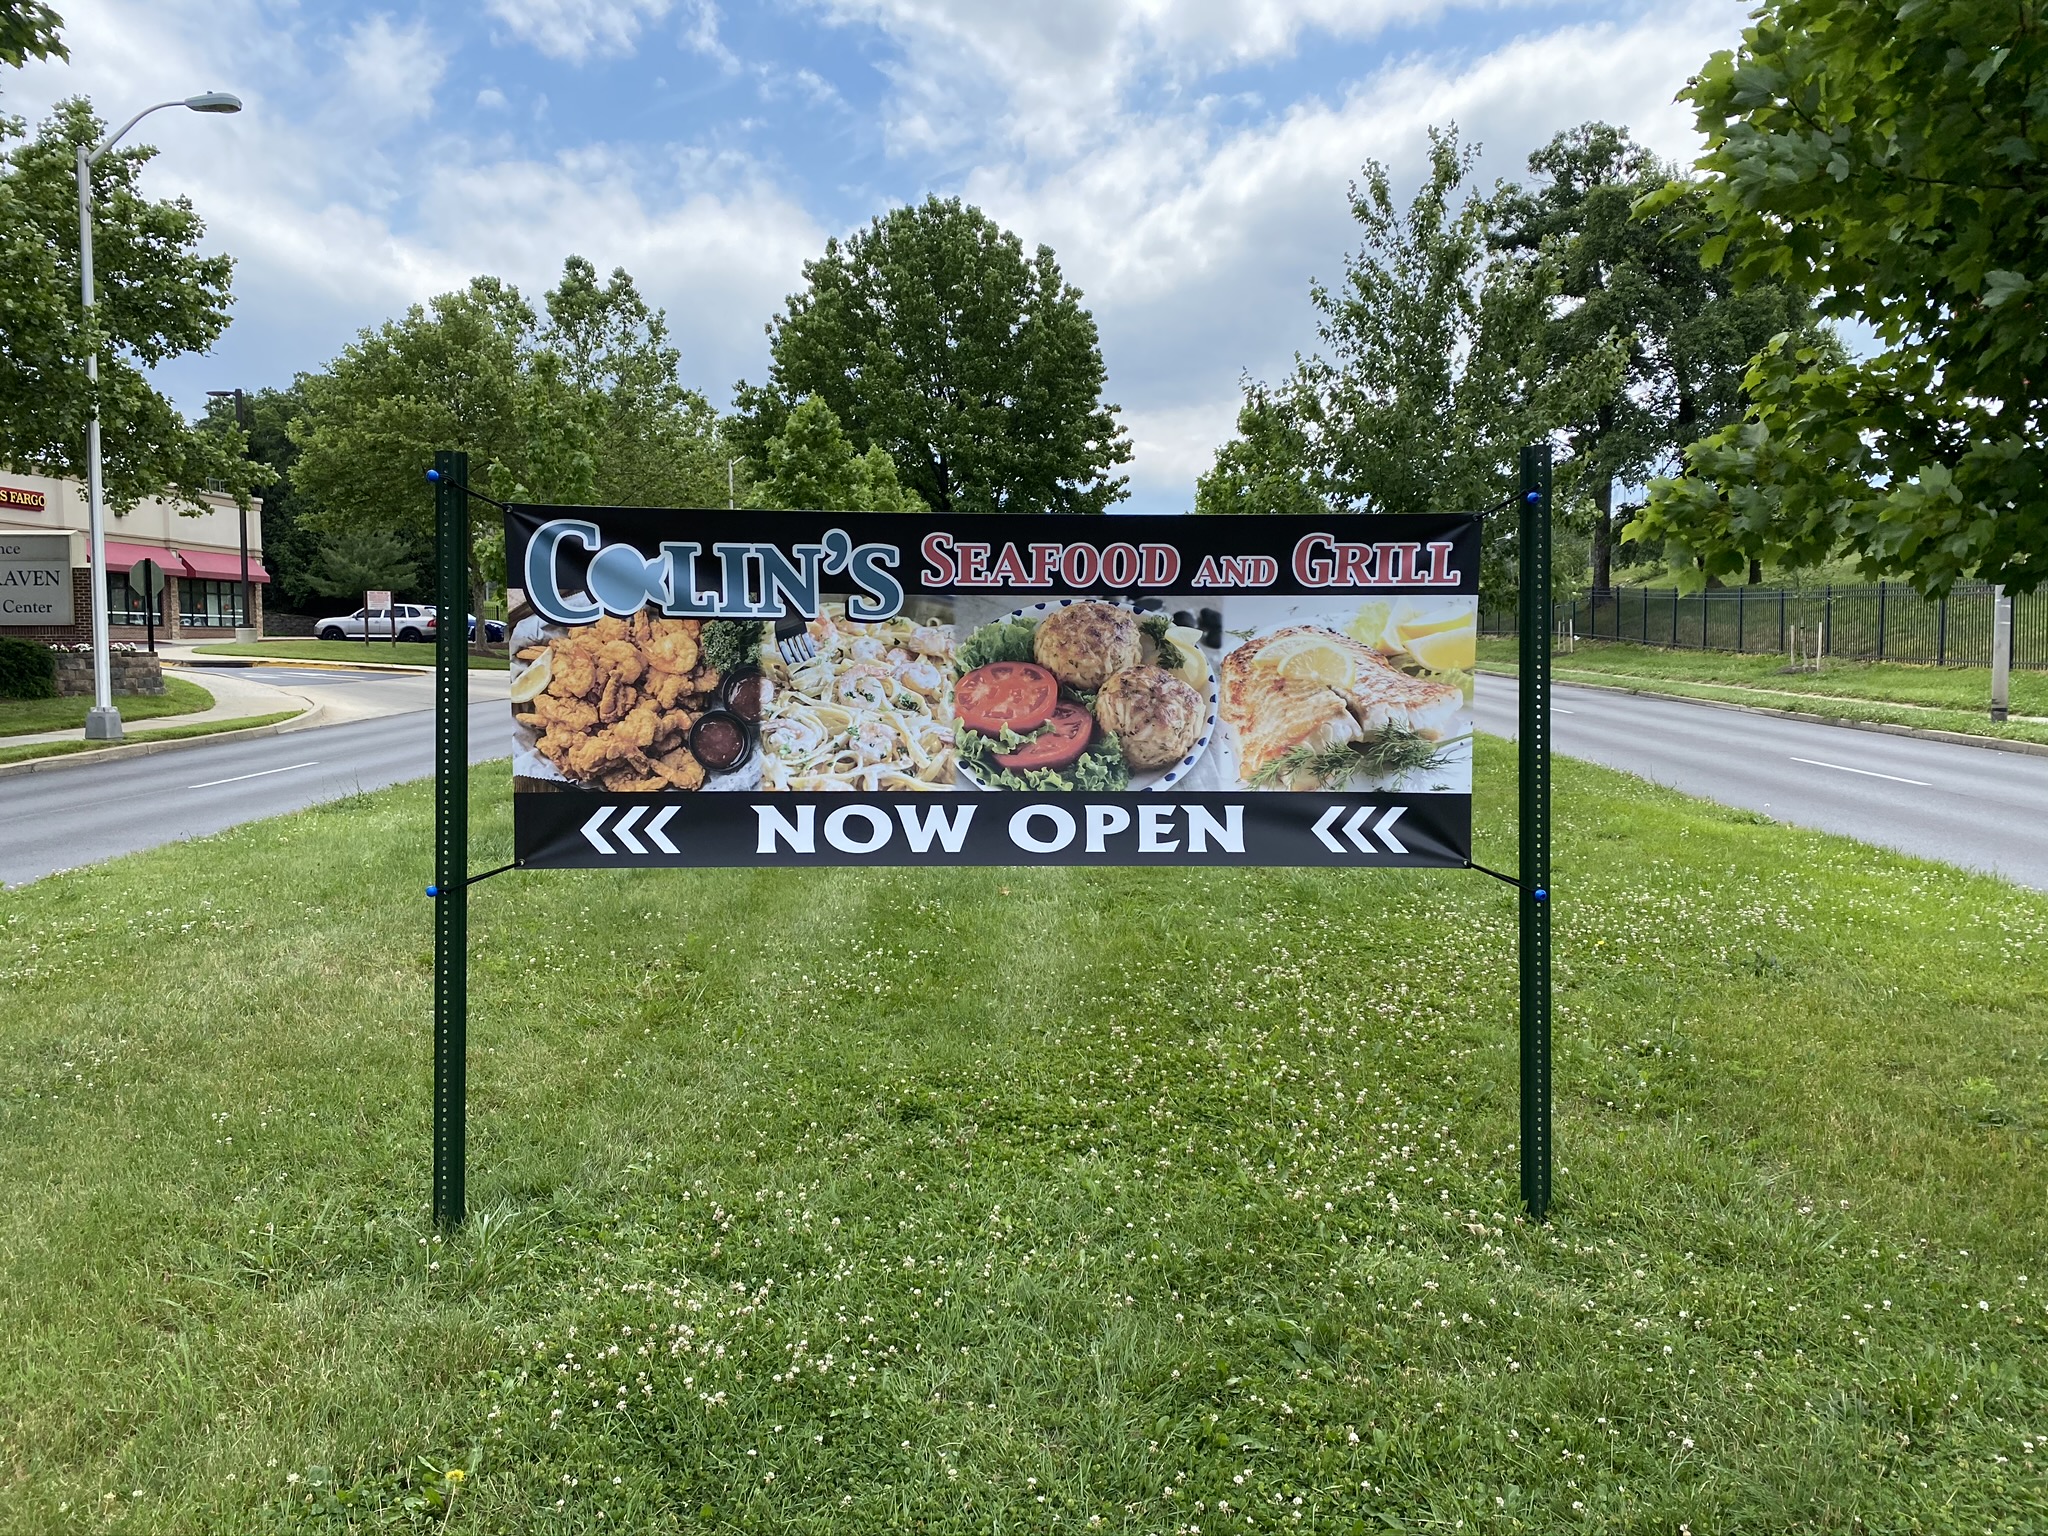 Colin's Seafood and Grill Roadside Banner